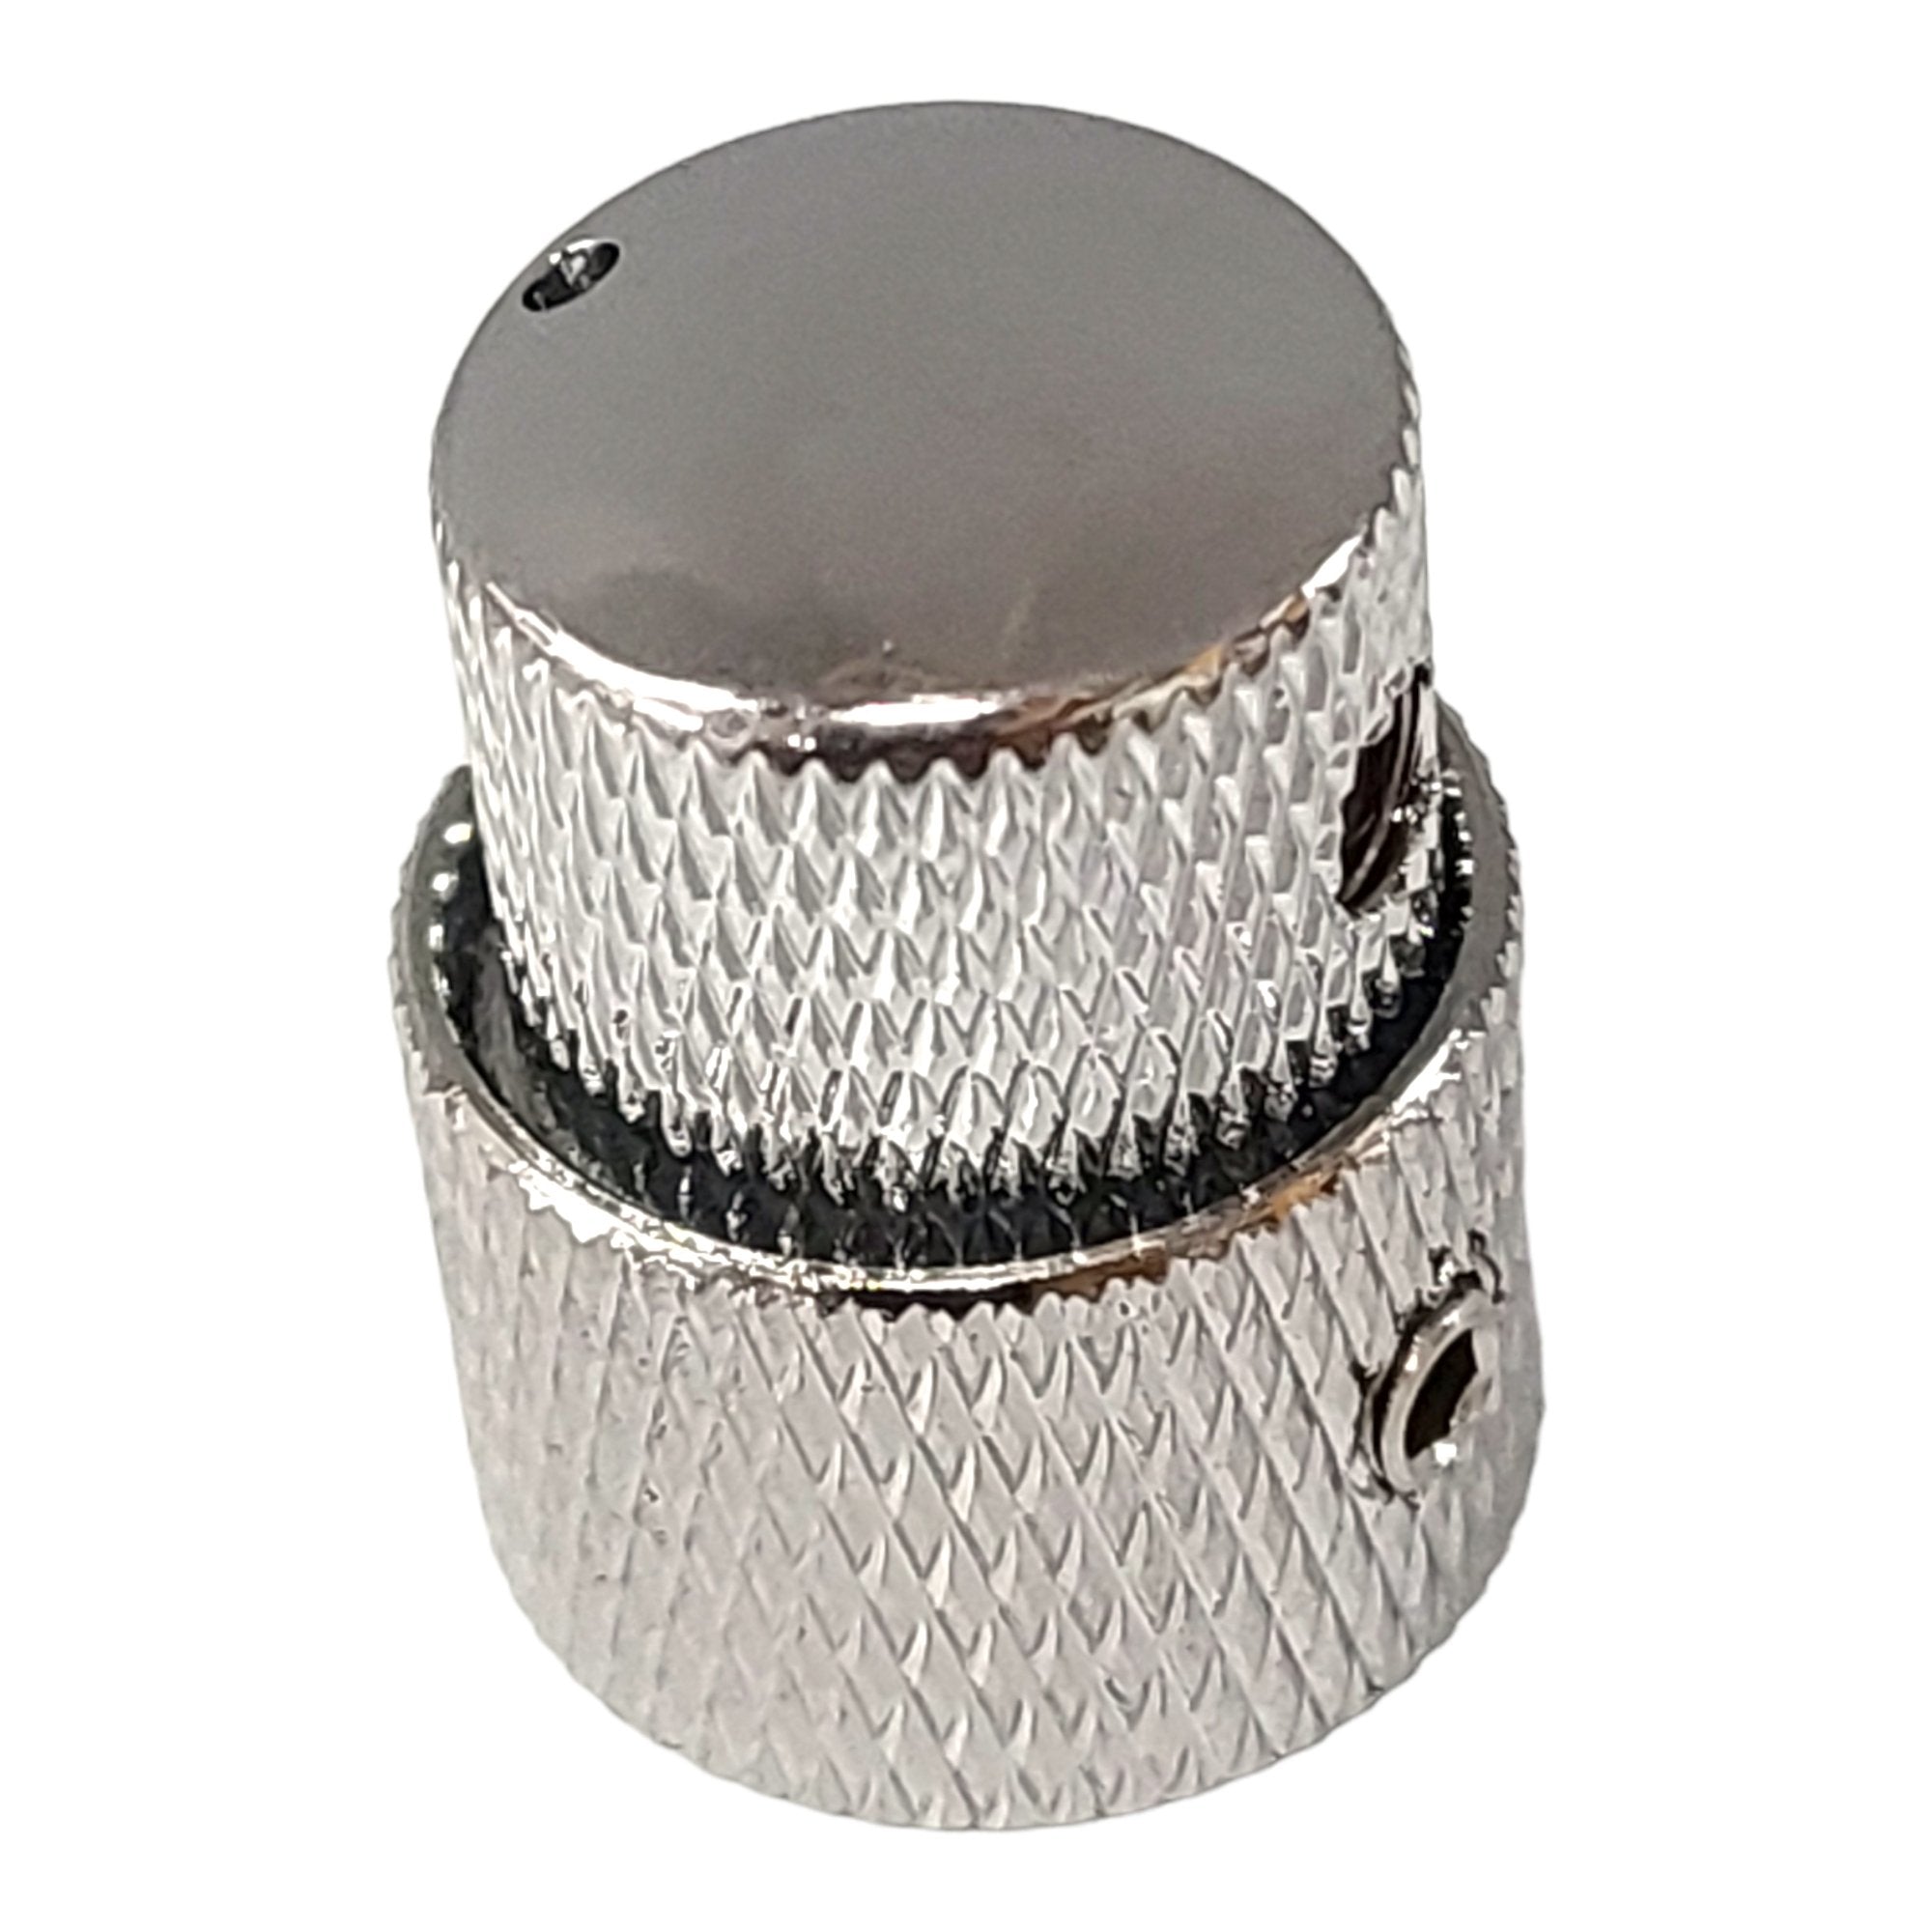 Dual Concentric Stacked Metric Guitar Control Knobs